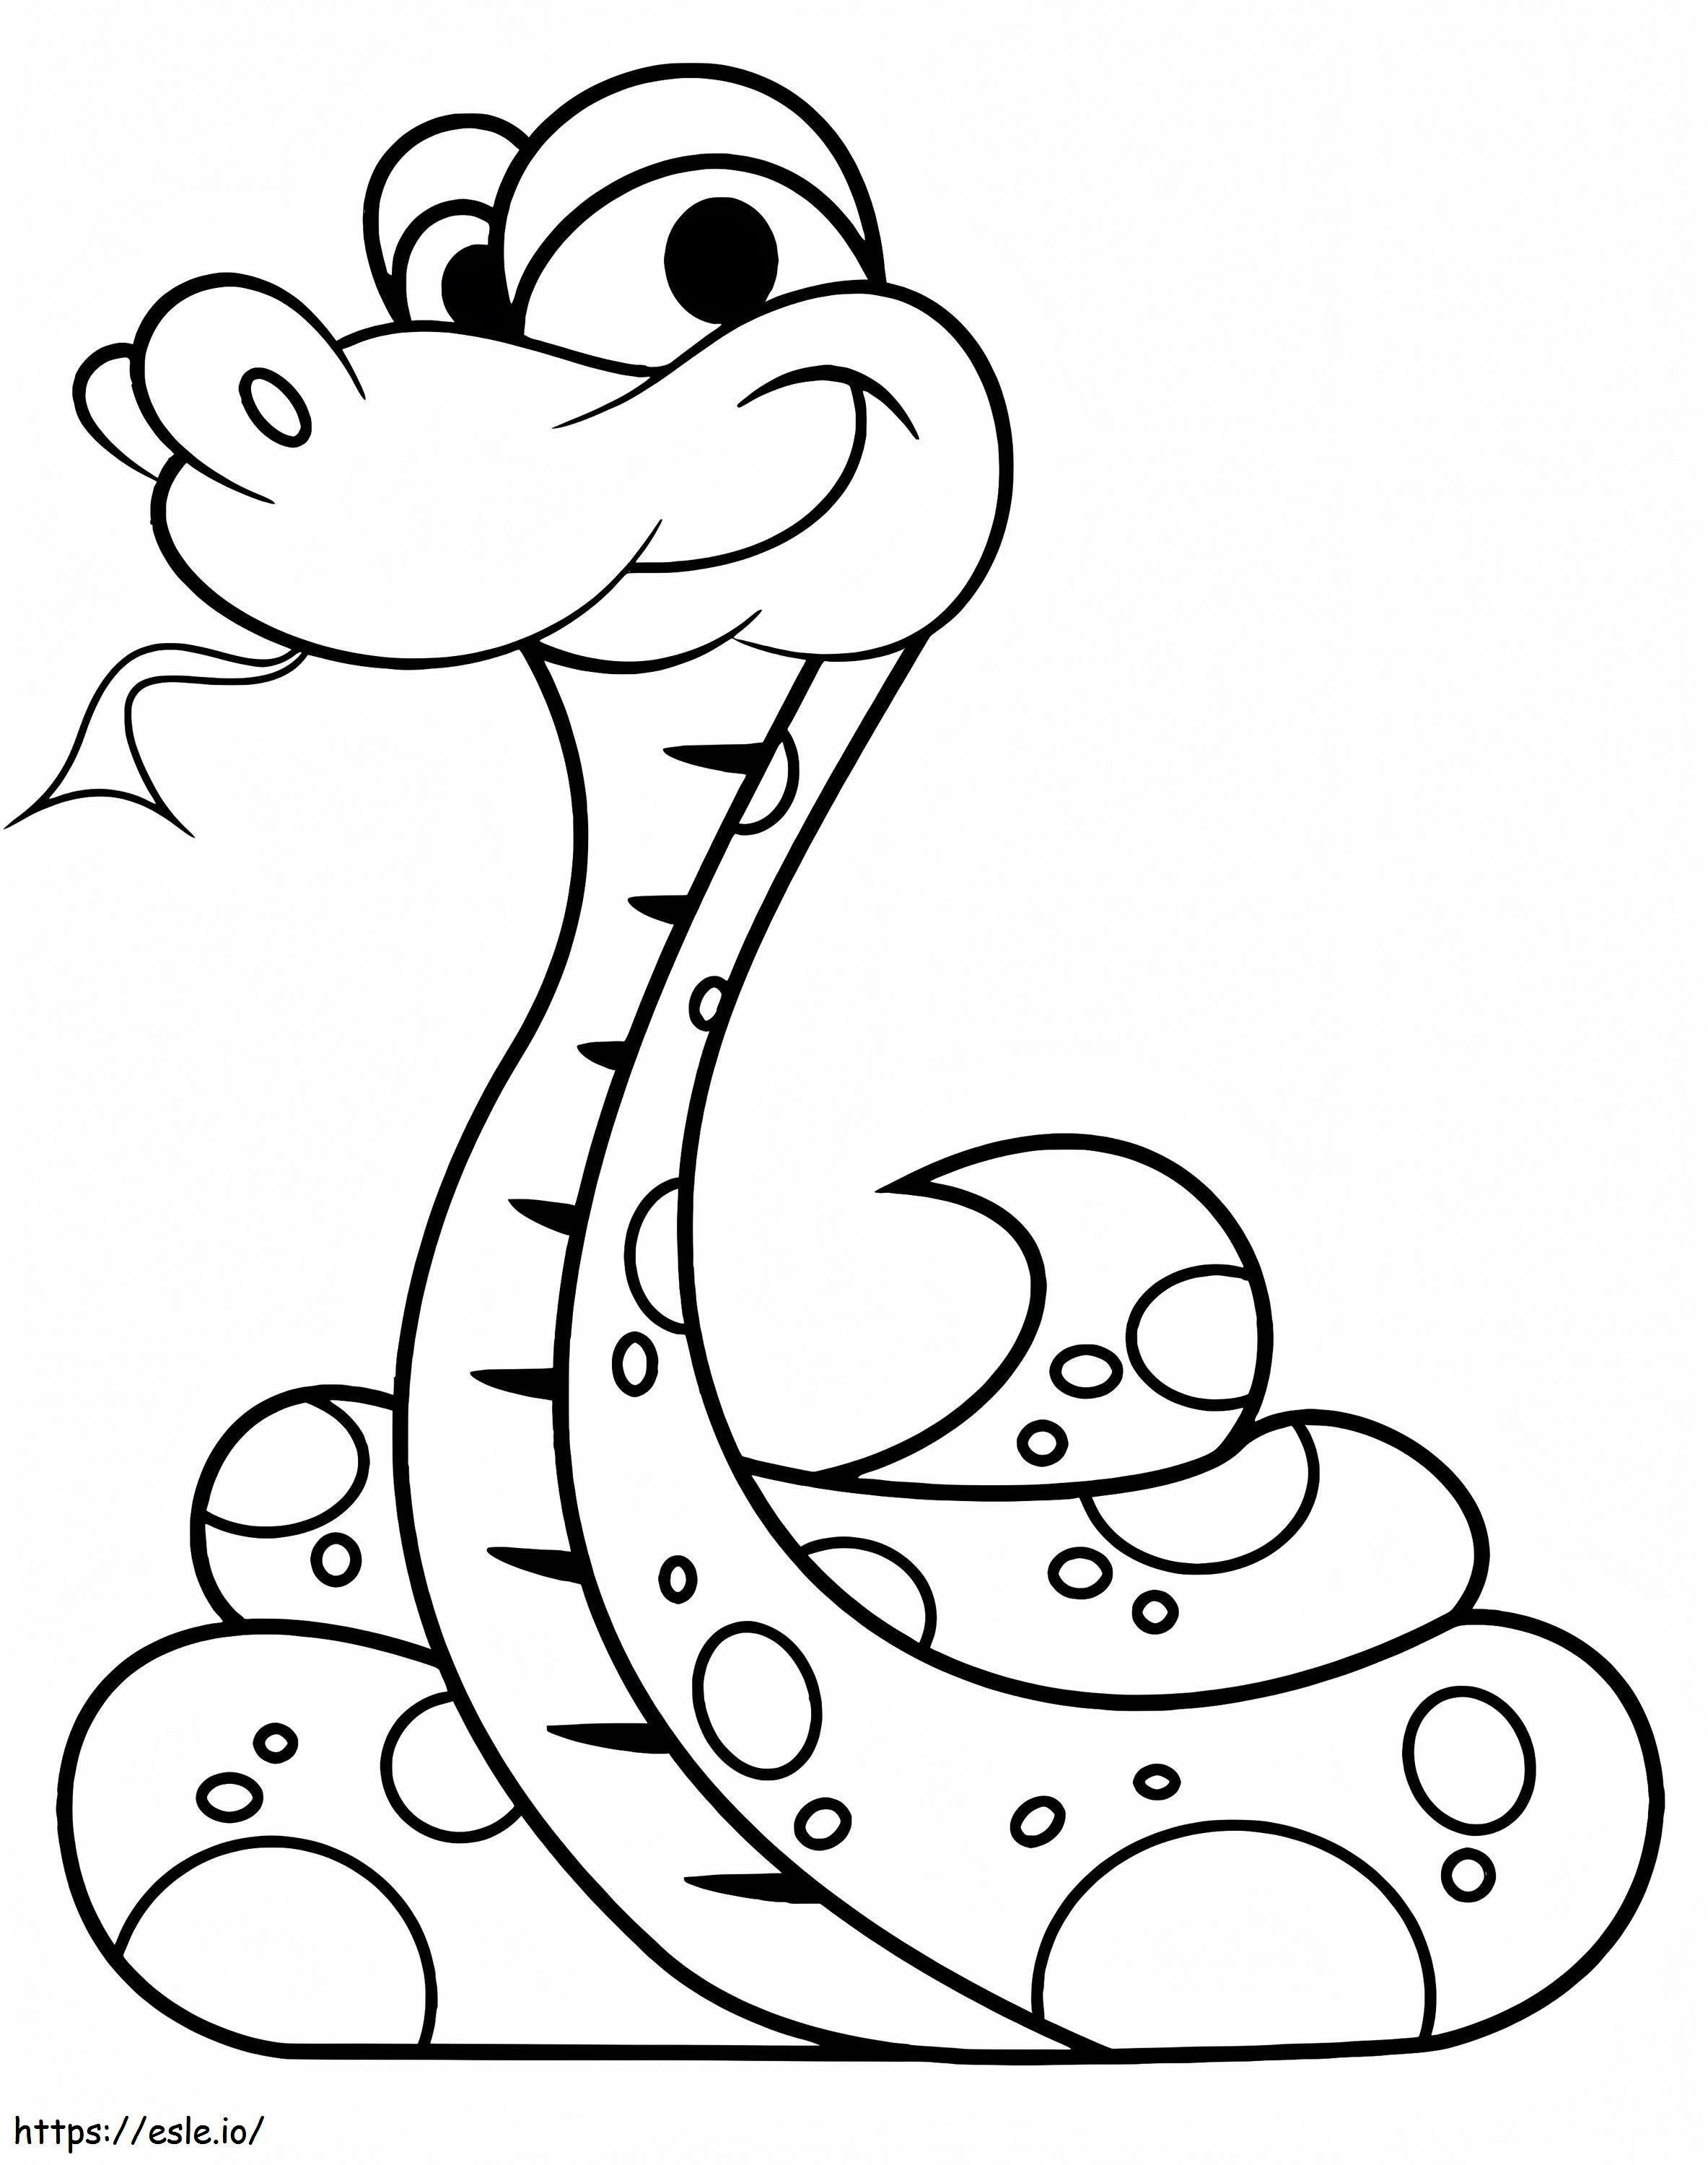 Animated Snake coloring page